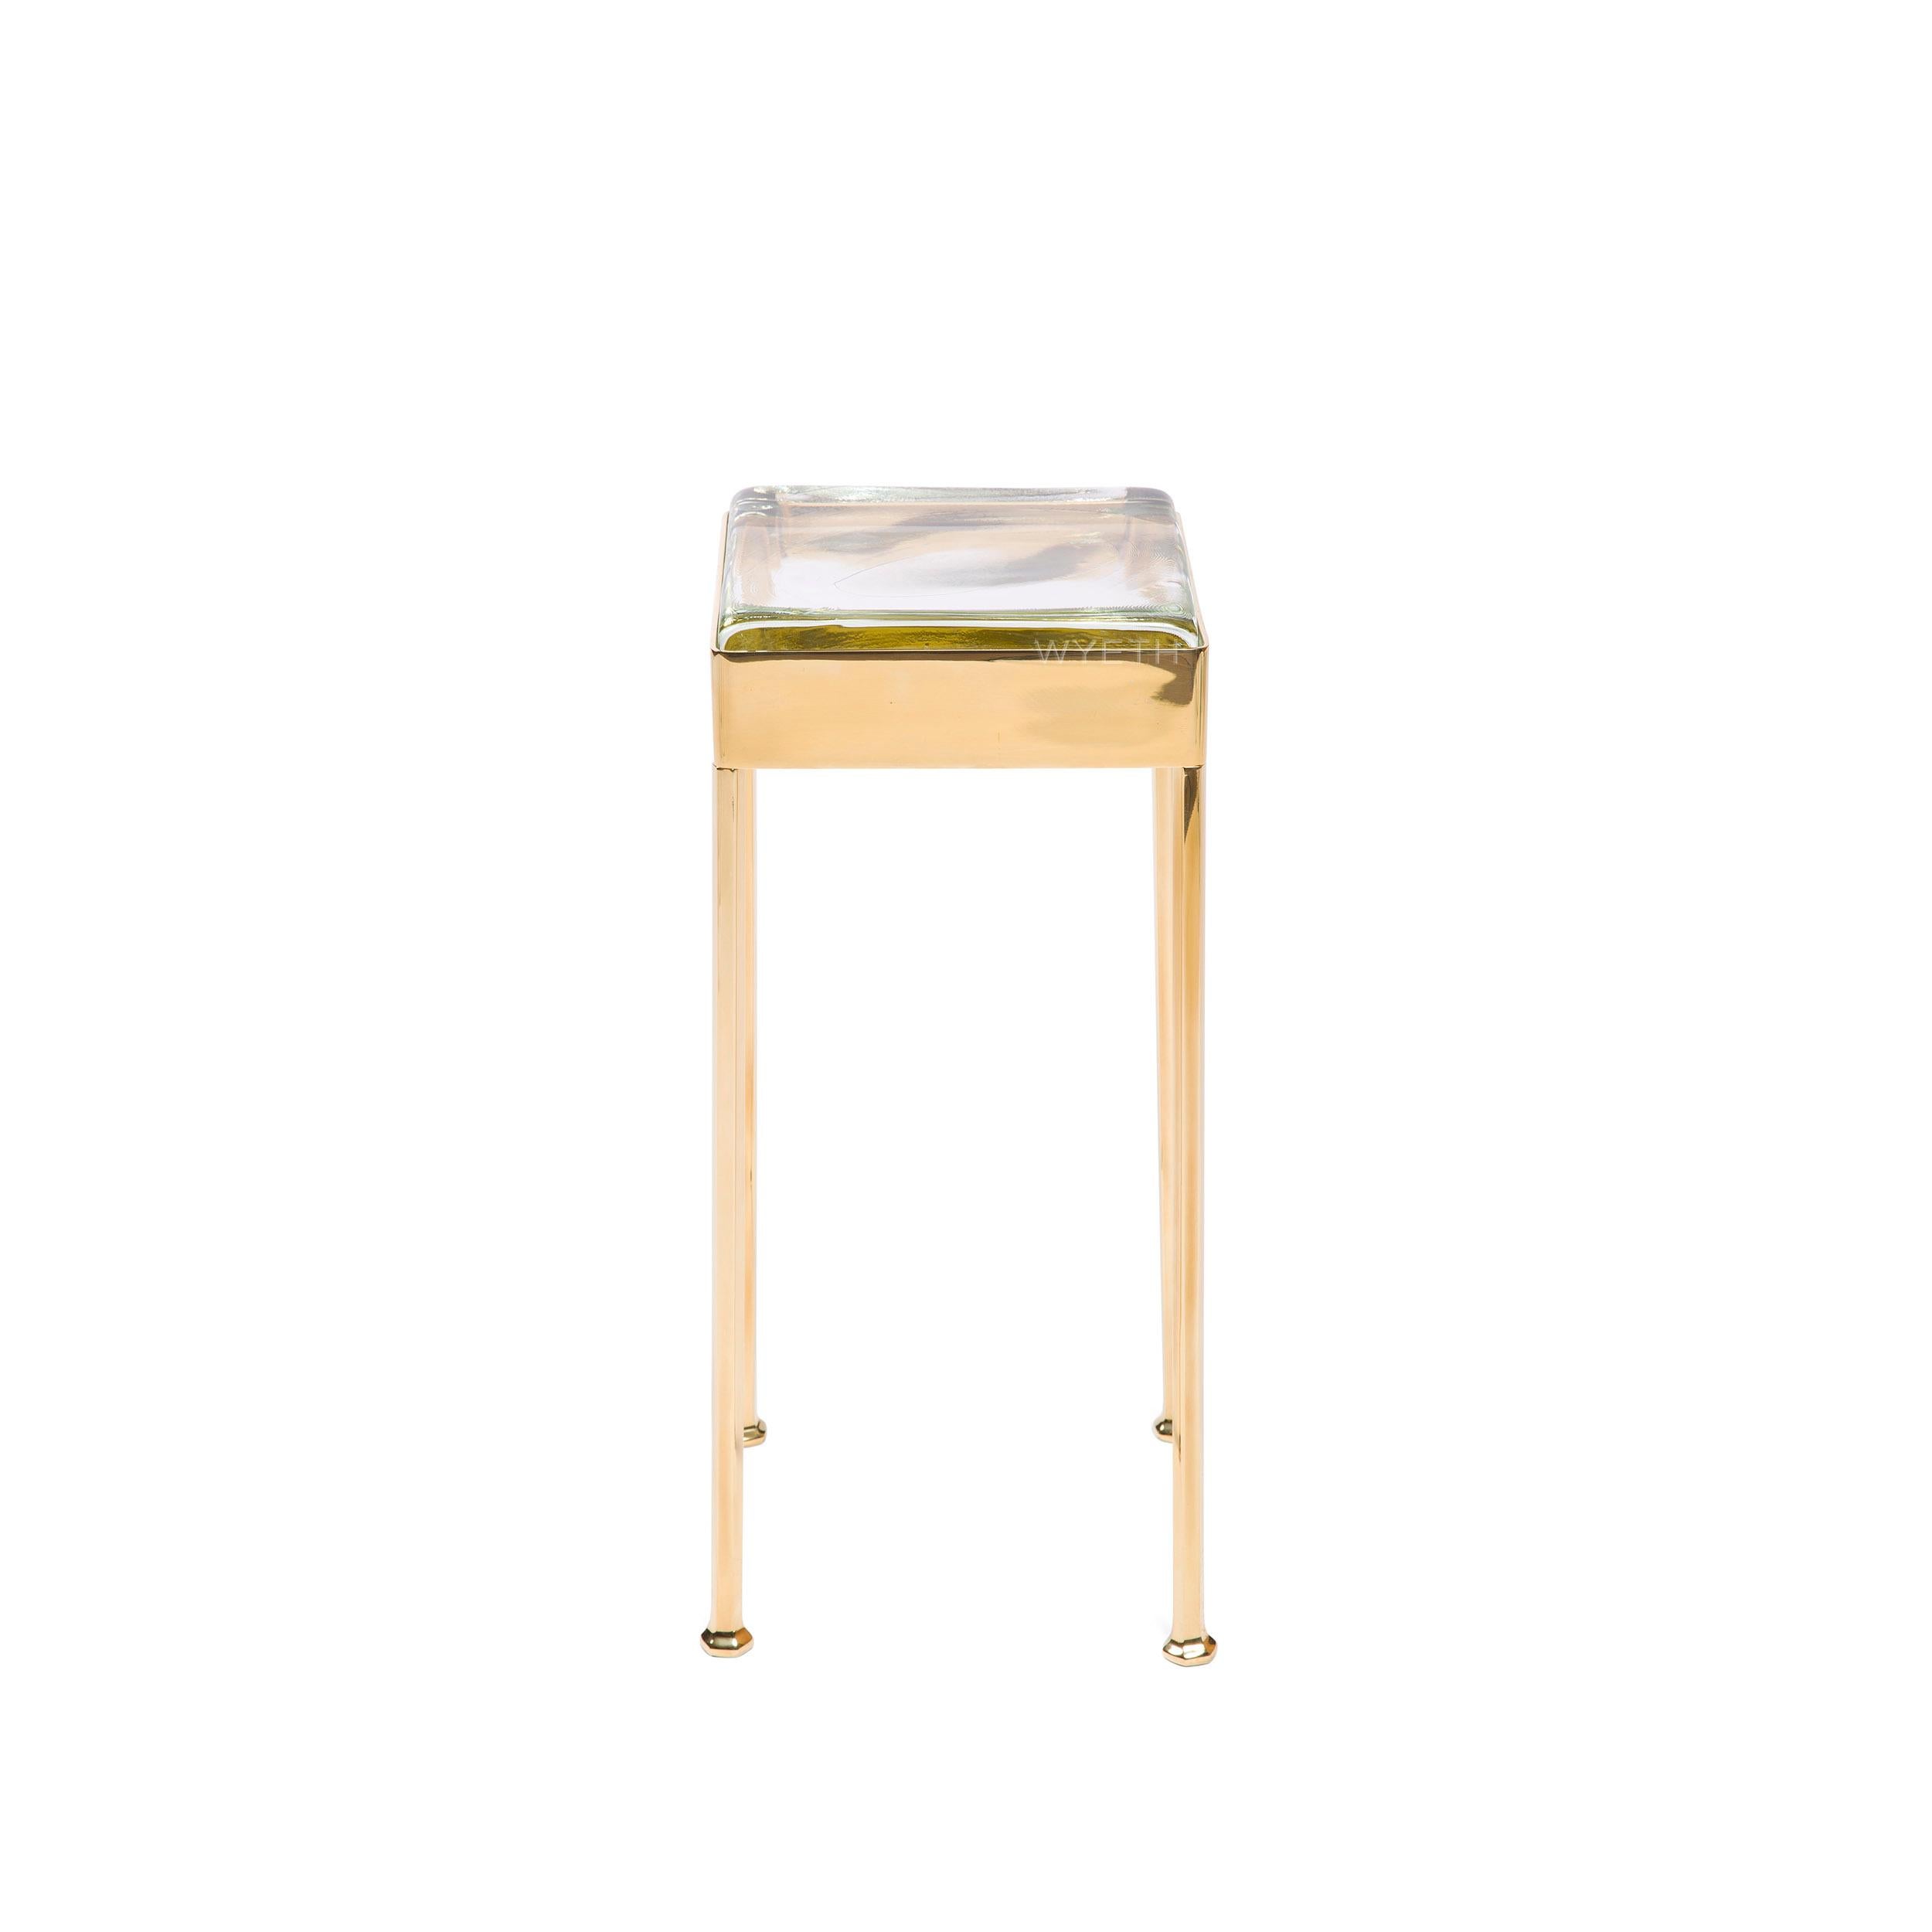 A bronze studio-made cocktail table, having a square banded apron holding a glass tile that rests on four faceted legs. Available in polished, brushed, patinated and blackened bronze. Made by the Wyeth Workshop, NY.